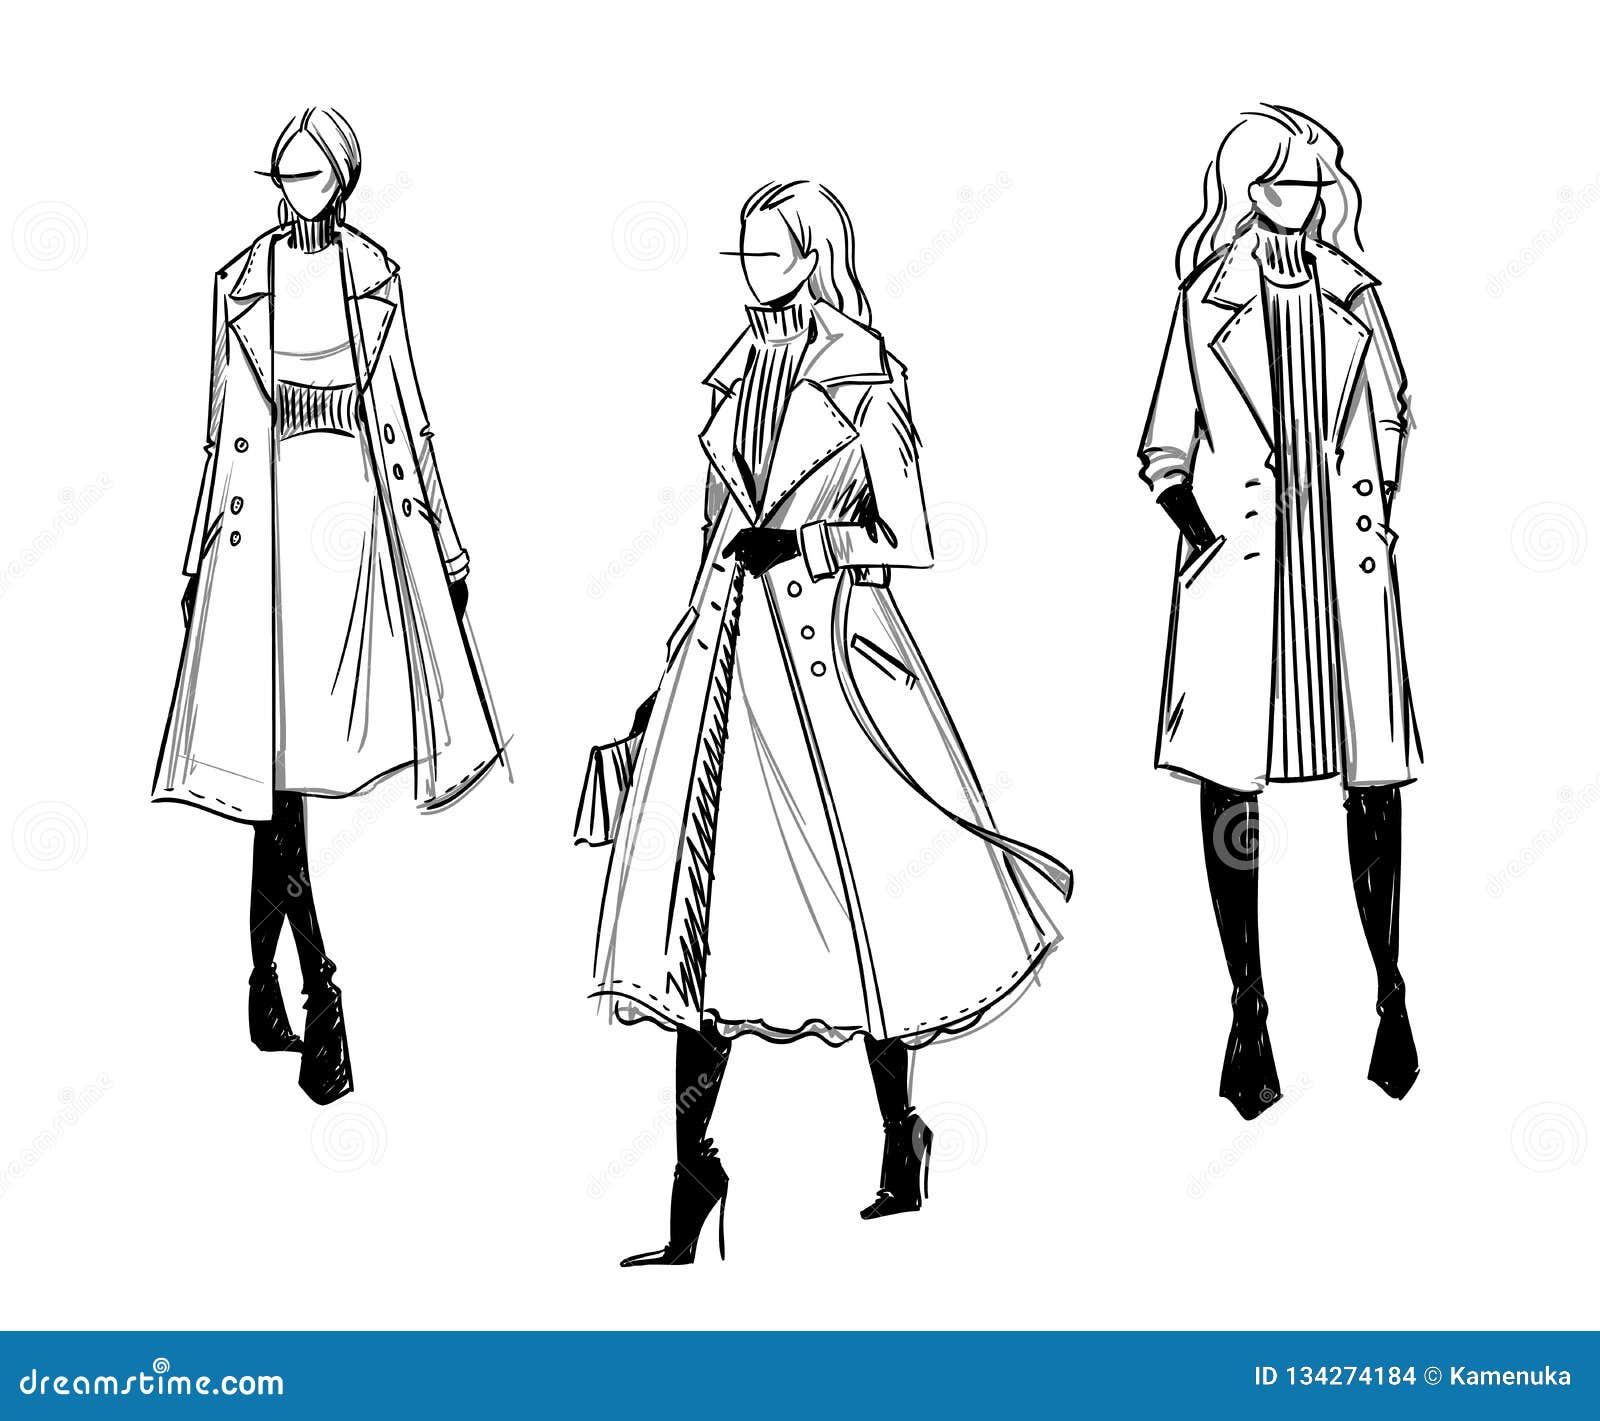 How to Draw a Trench Coat - Easy Drawing Art